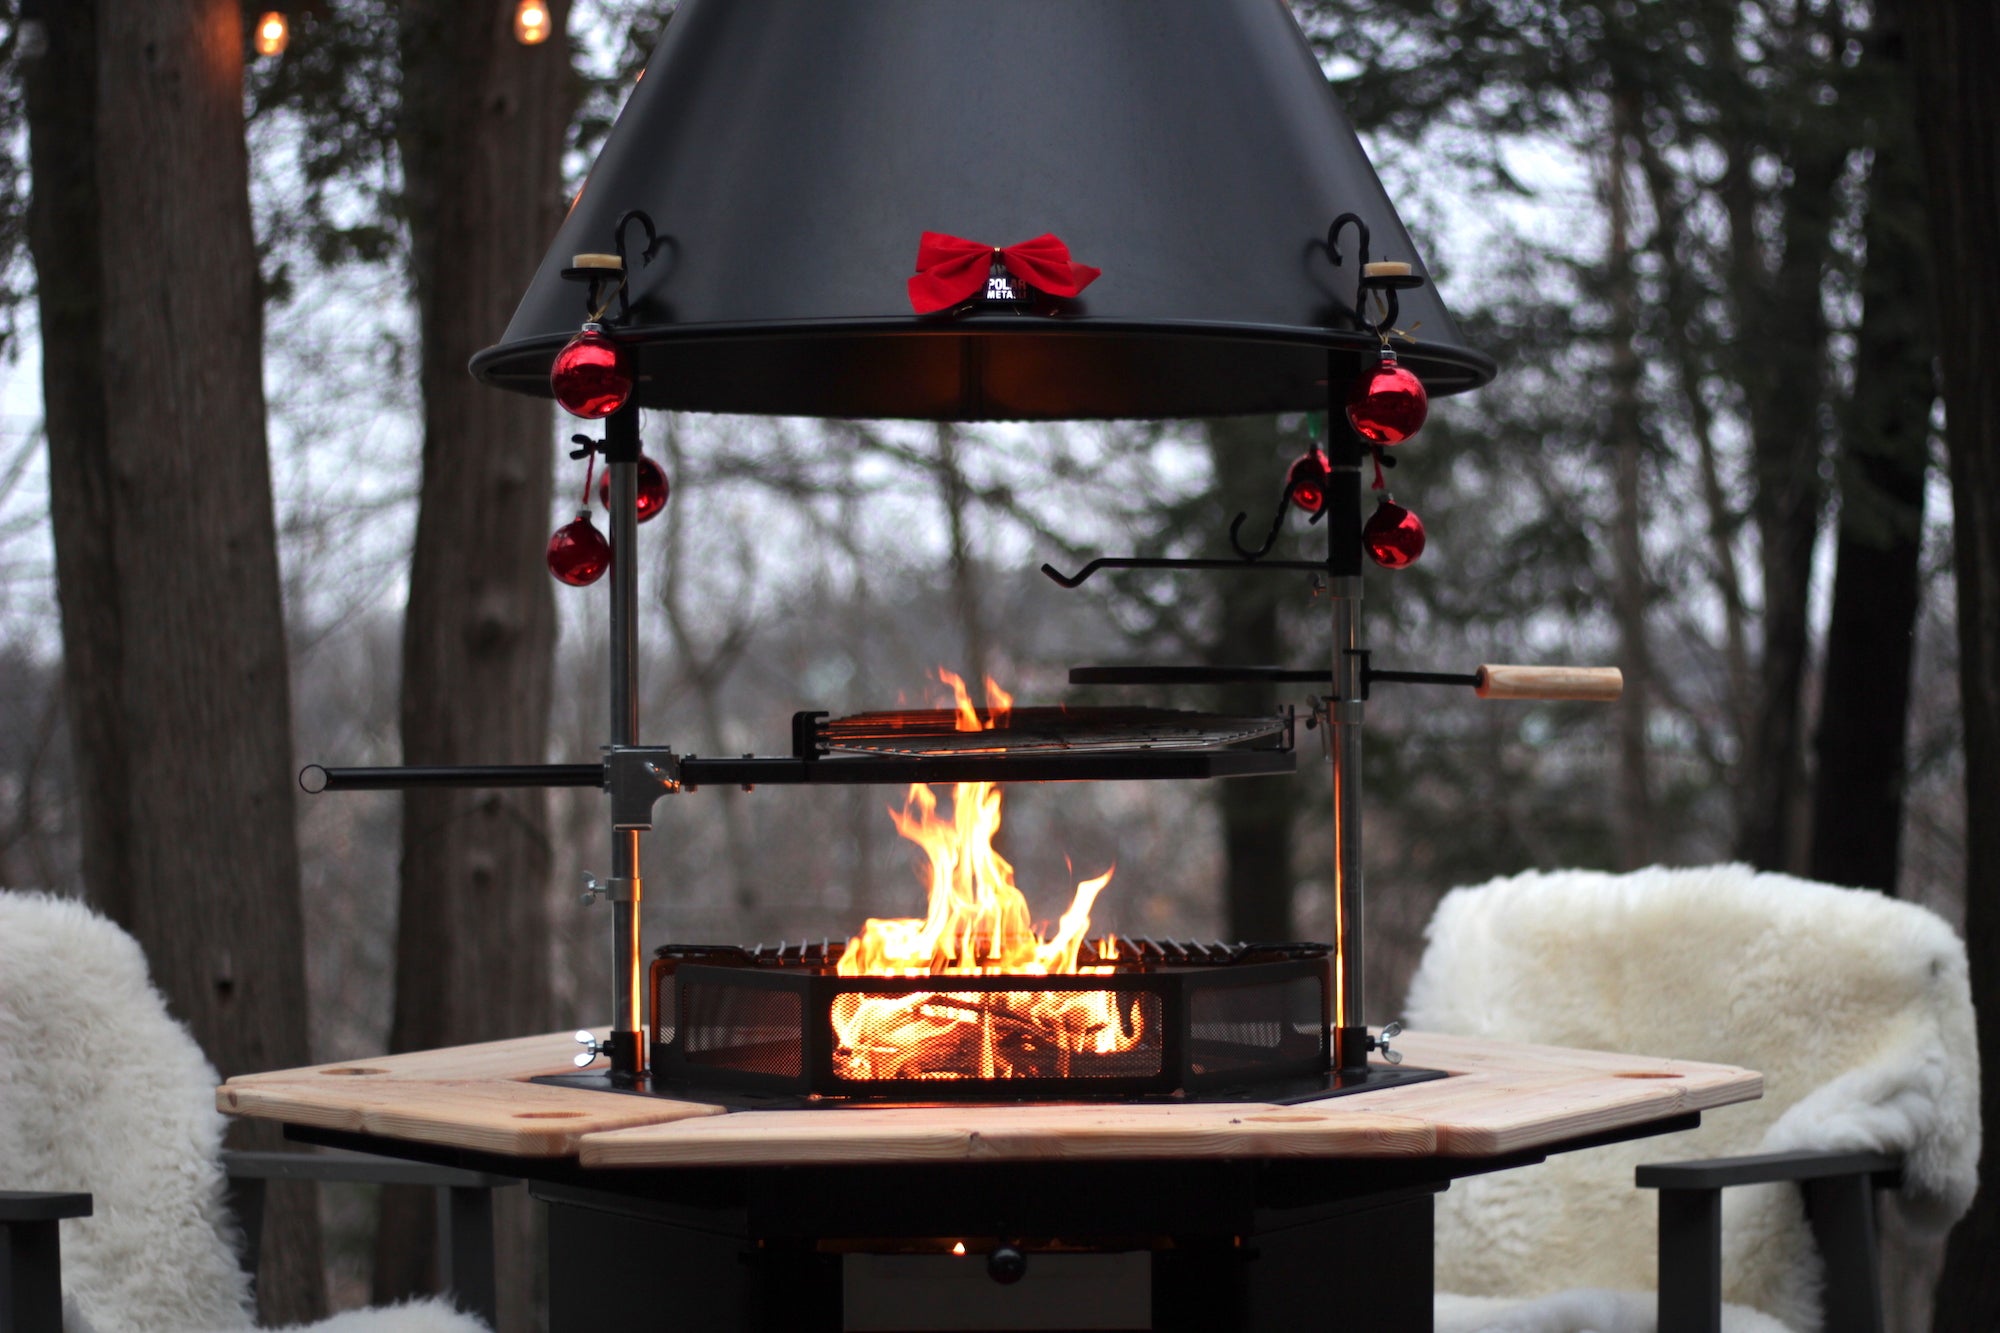    A Winder Celebration themed Kota Grill adorned with a bow and decorations while a fire burns surrounded by sheepskin covered chairs.    